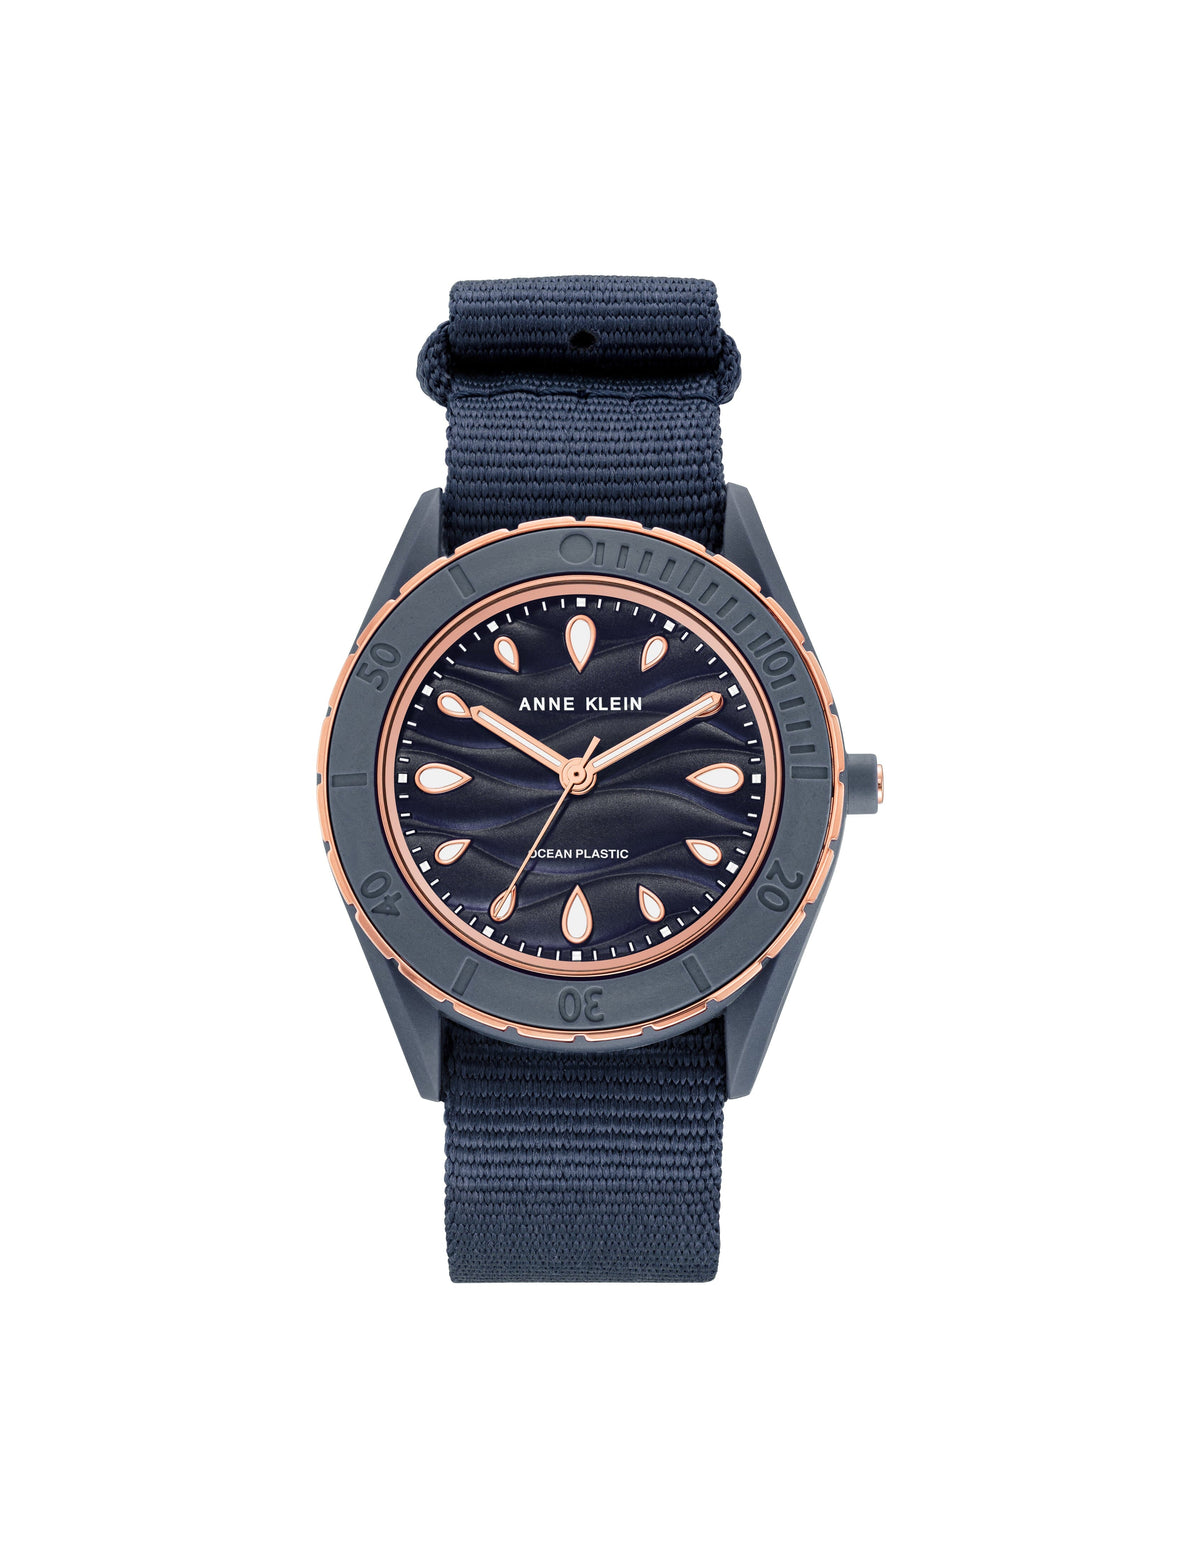 Anne Klein Rose Gold-Tone/ Navy Blue Consider It Solar Recycled Ocean Plastic Woven Strap Watch - Clearance